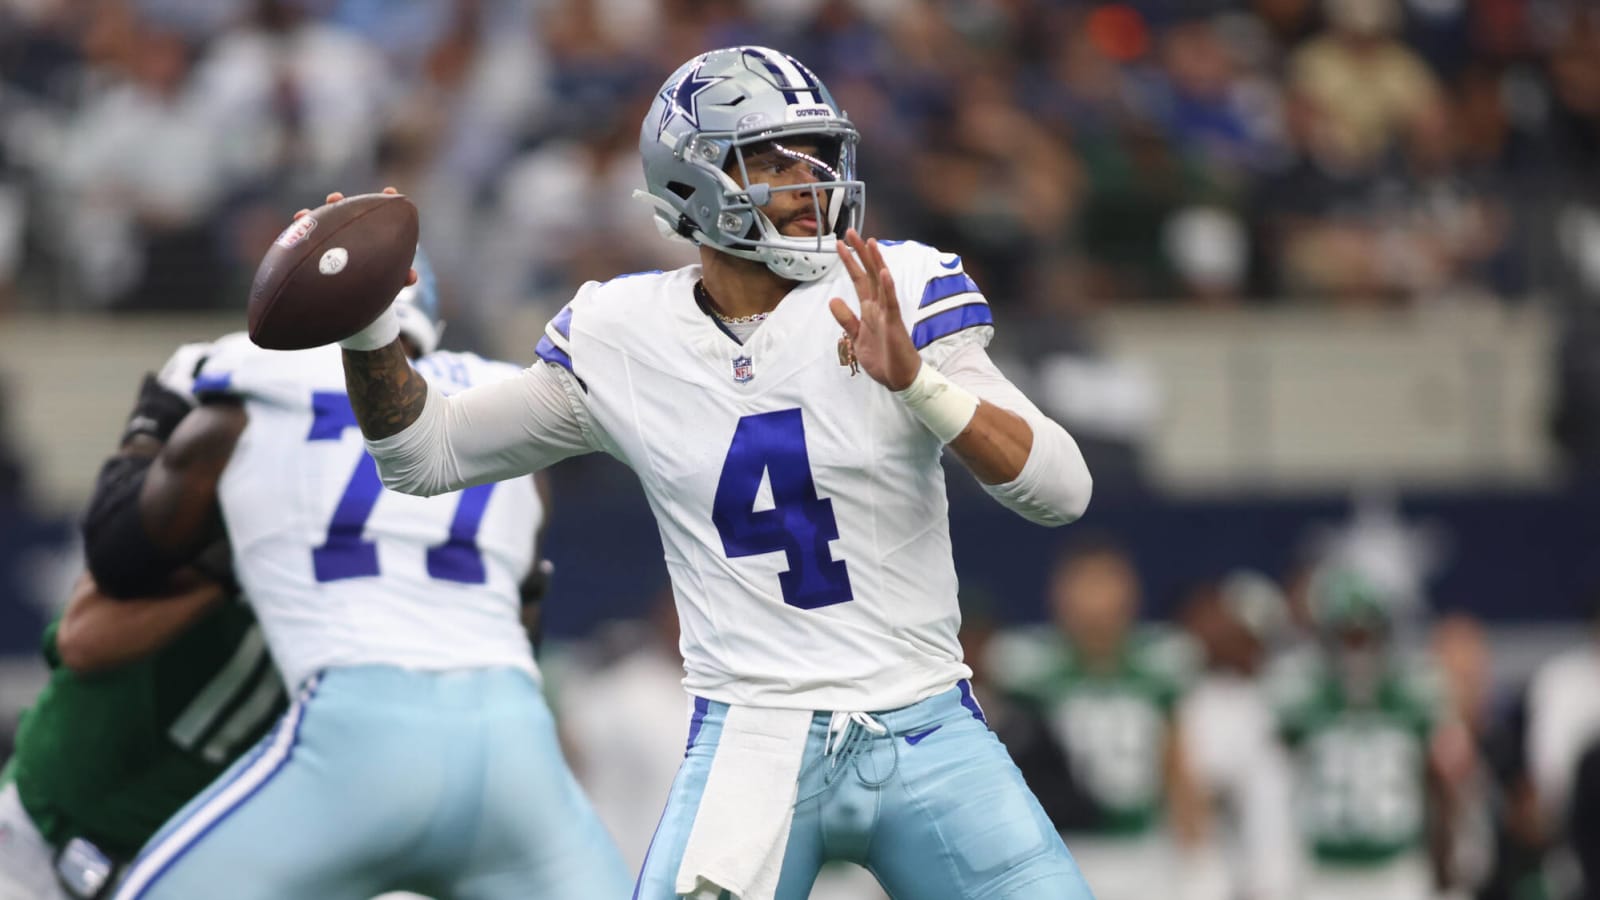 Cowboys benefit from questionable roughing the passer call in red zone